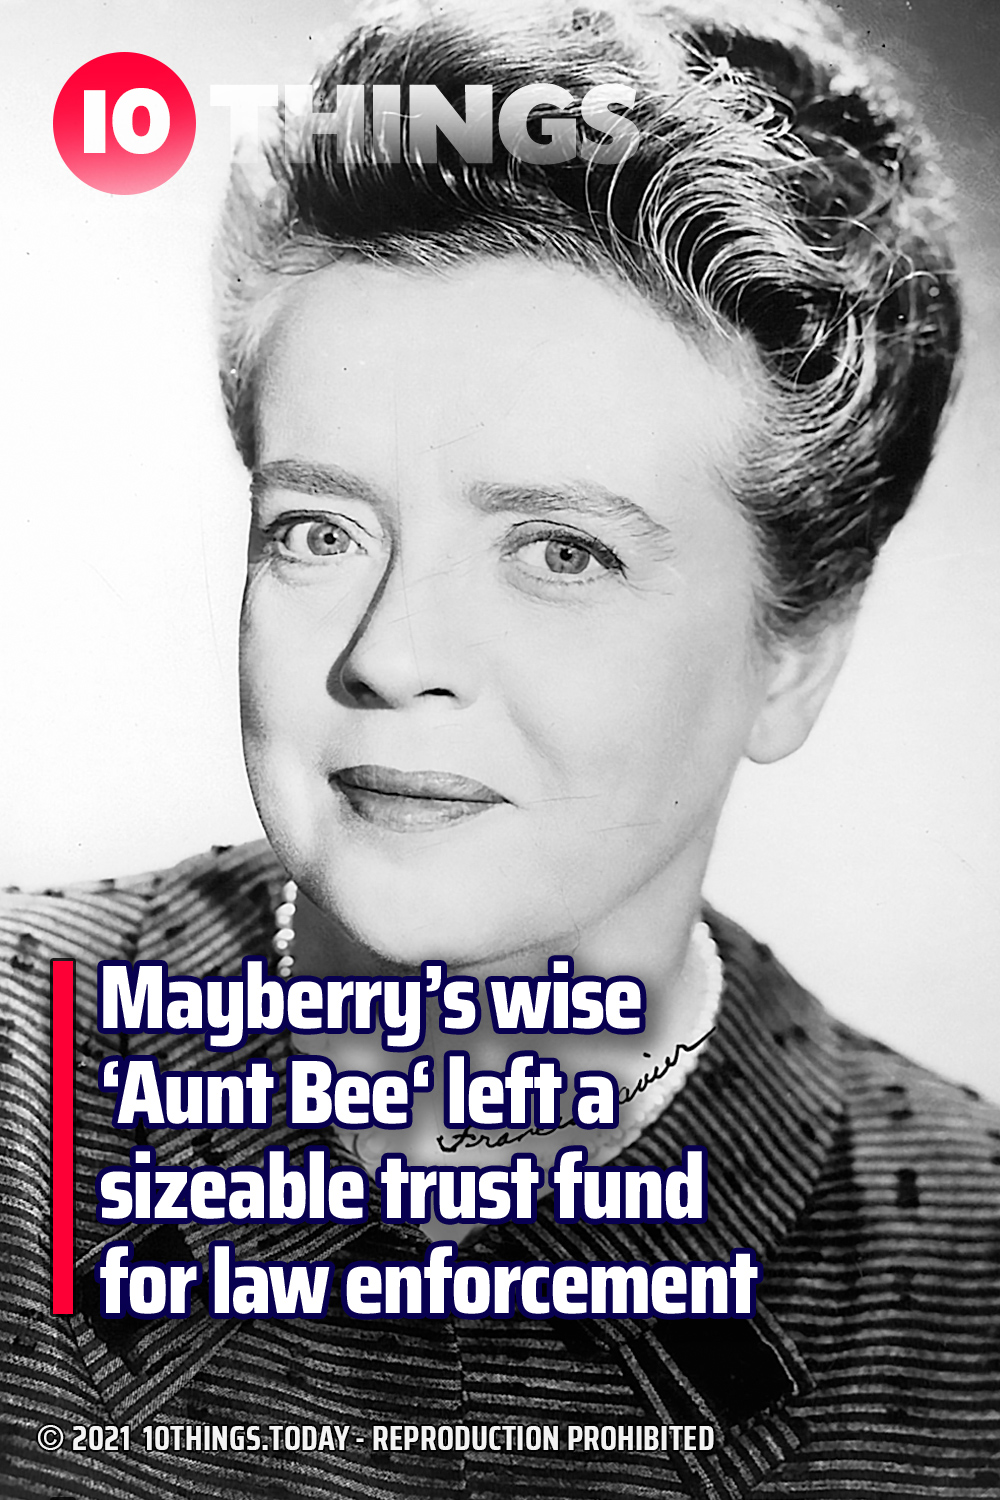 Mayberry’s wise ‘Aunt Bee‘ left a sizeable trust fund for law enforcement